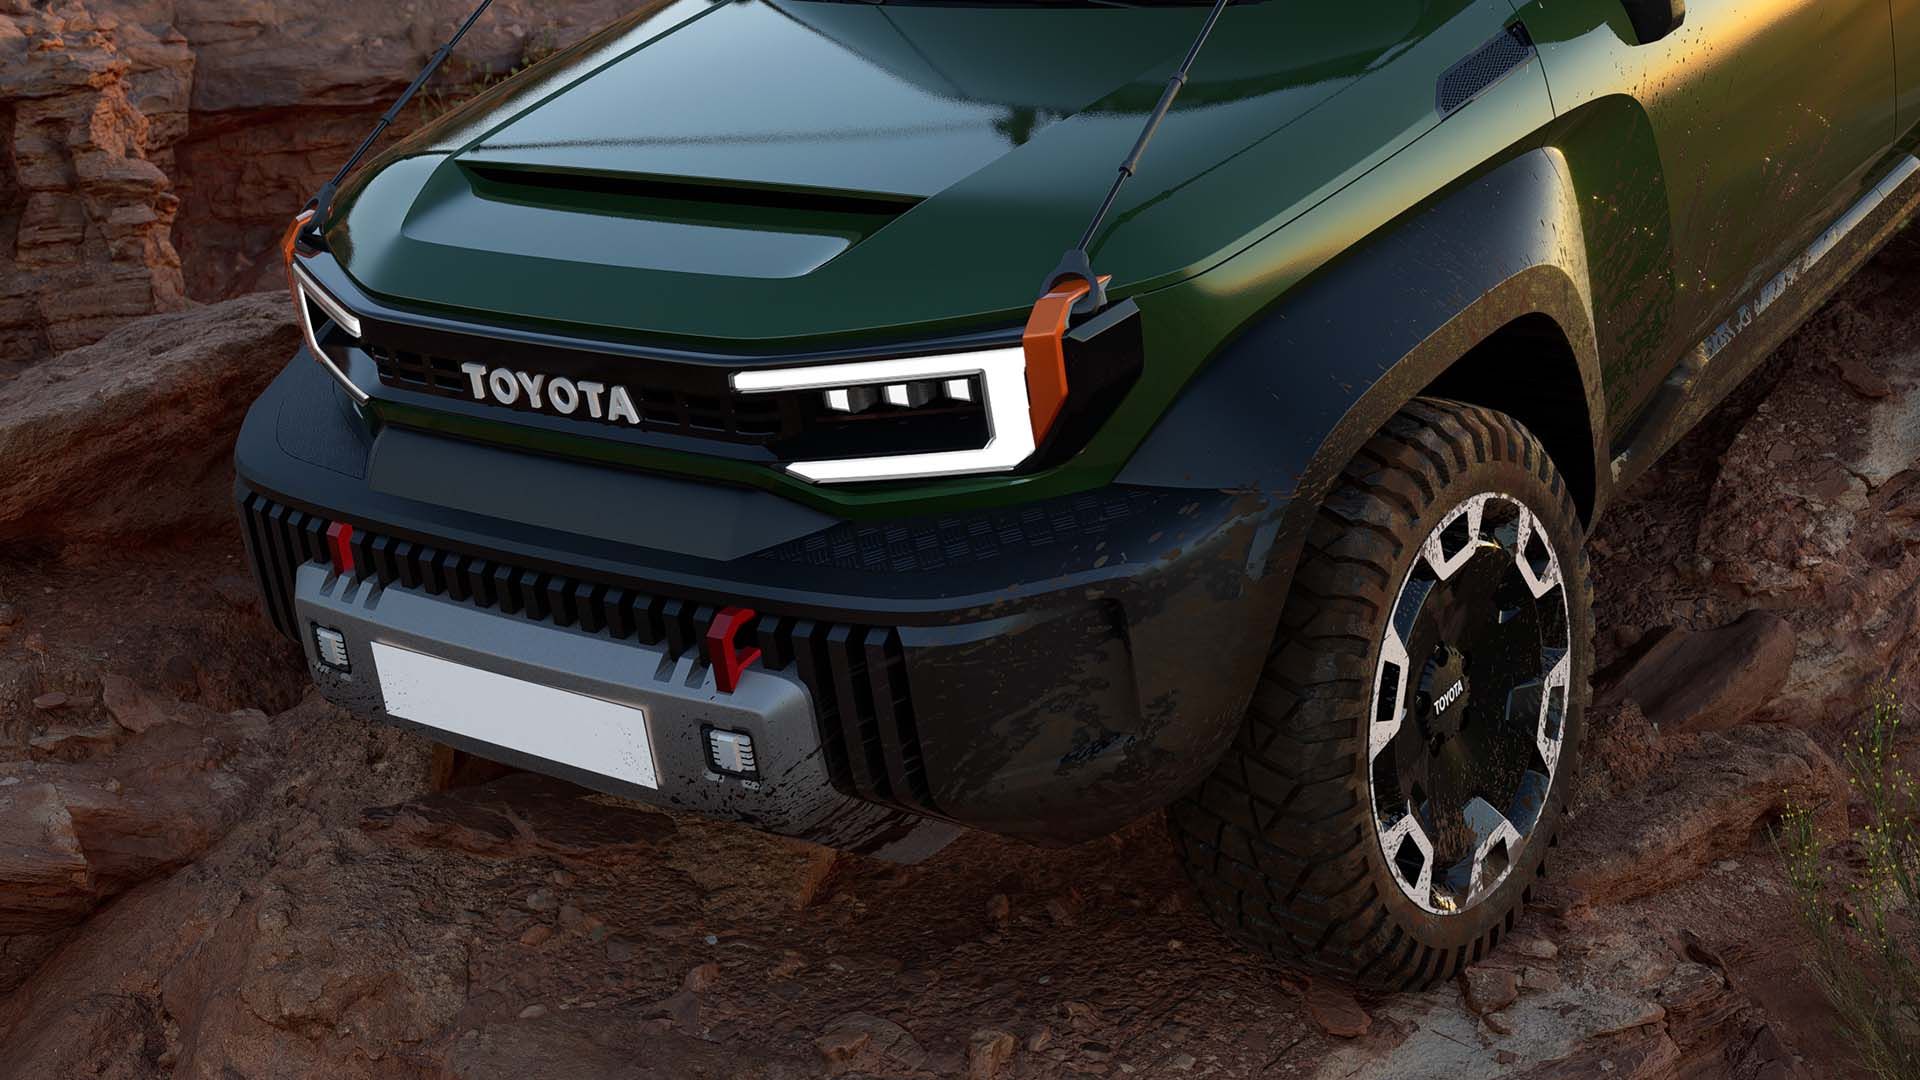 2025 Toyota Compact Land Cruiser: What We Know About The Ford